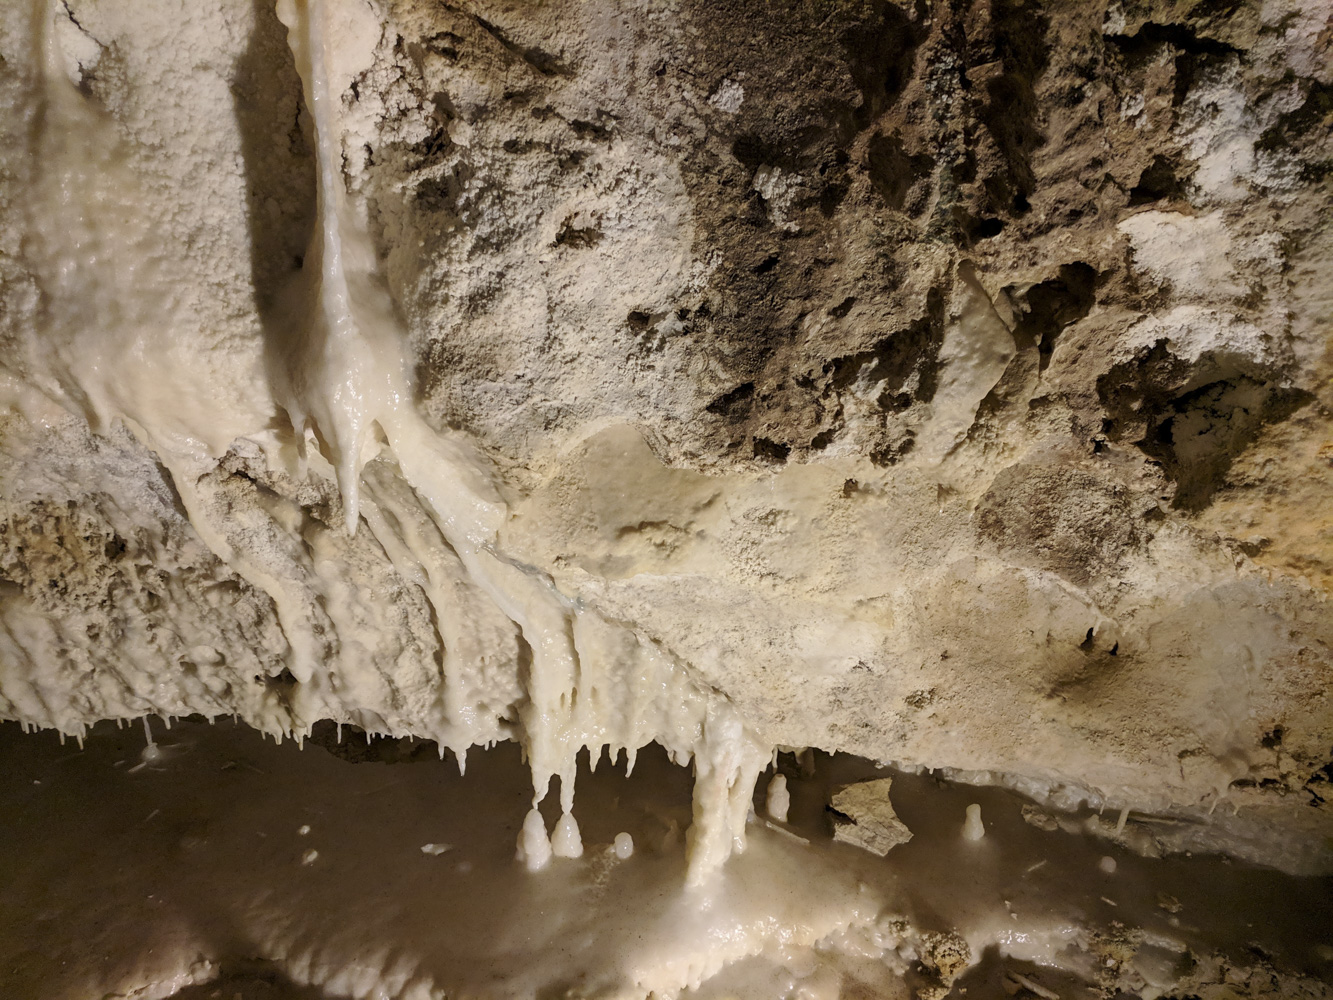 Inside the Frasassi Caves